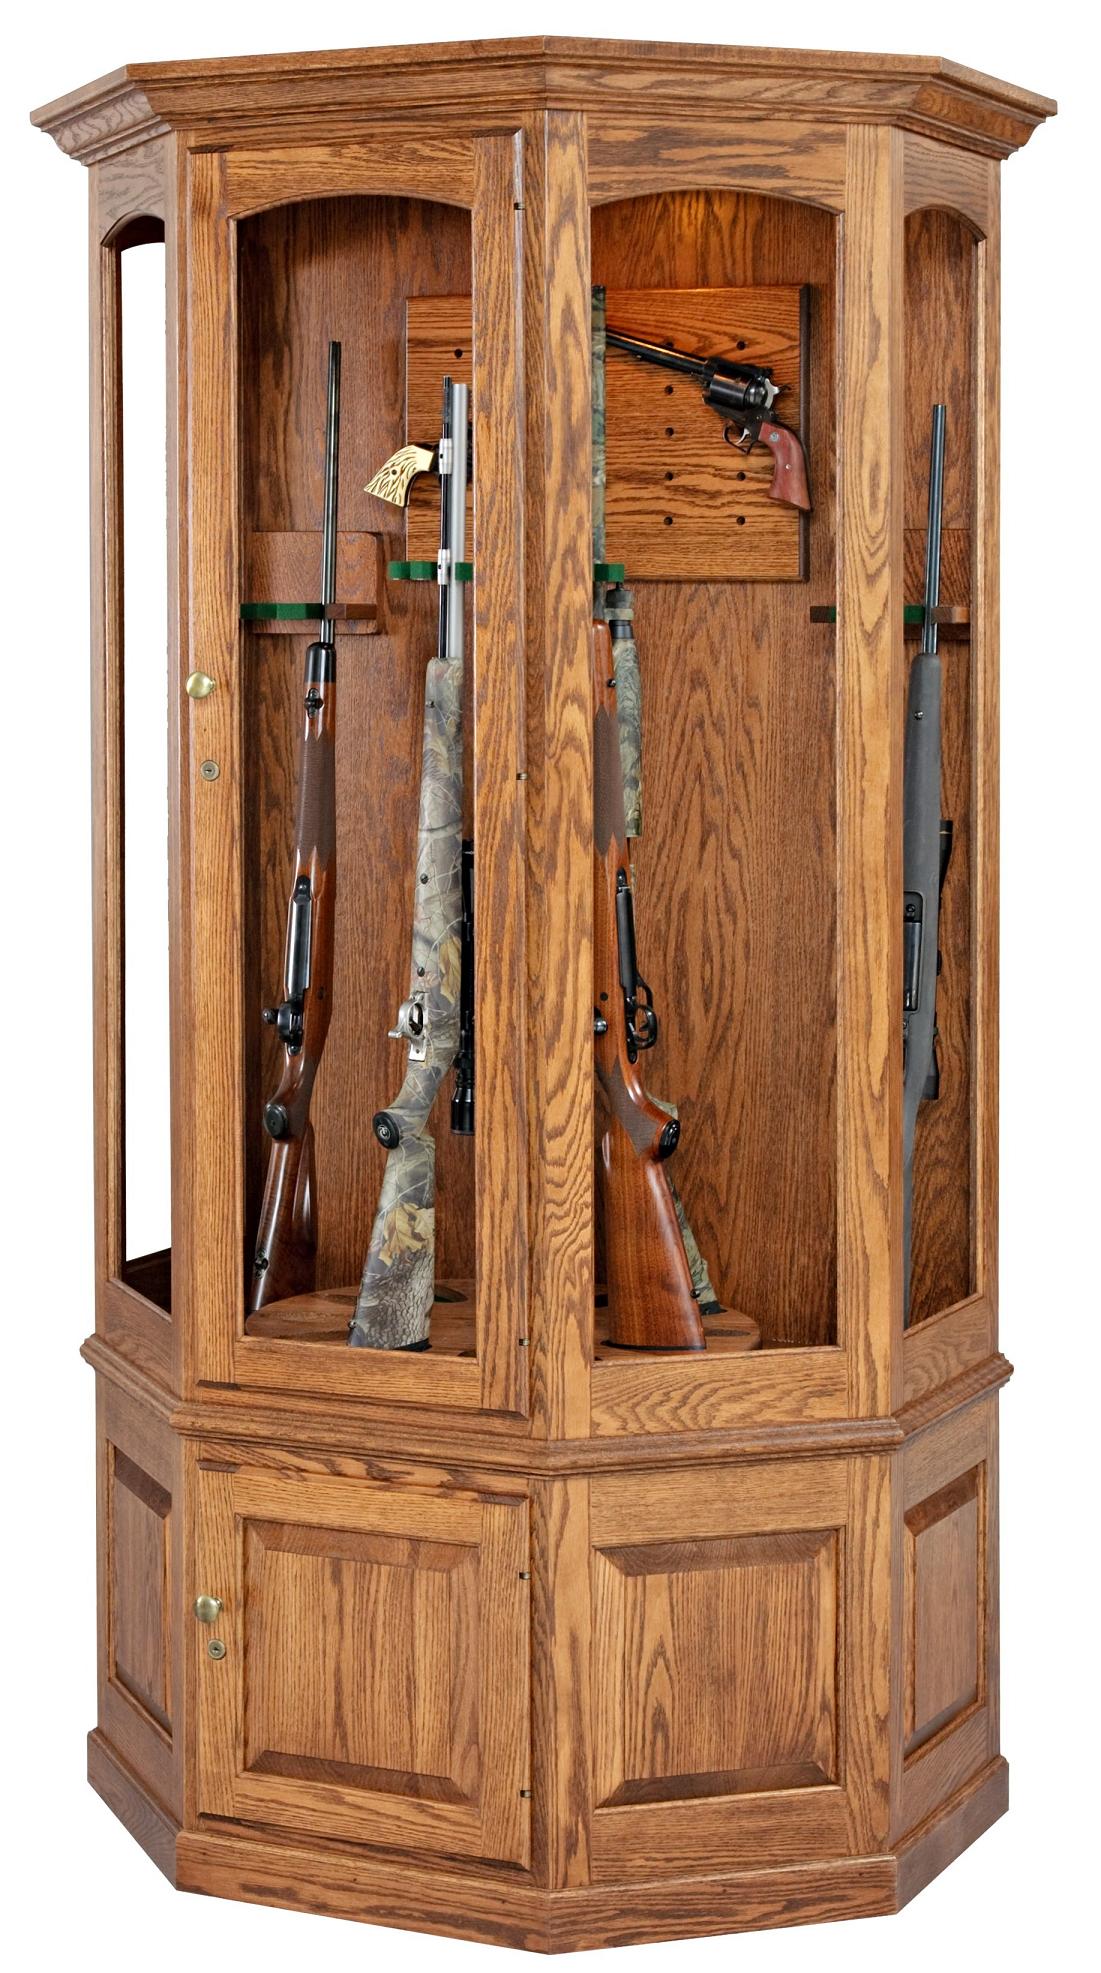 Swaying Her gun cabinets on Buying a New Gun Cabinet 